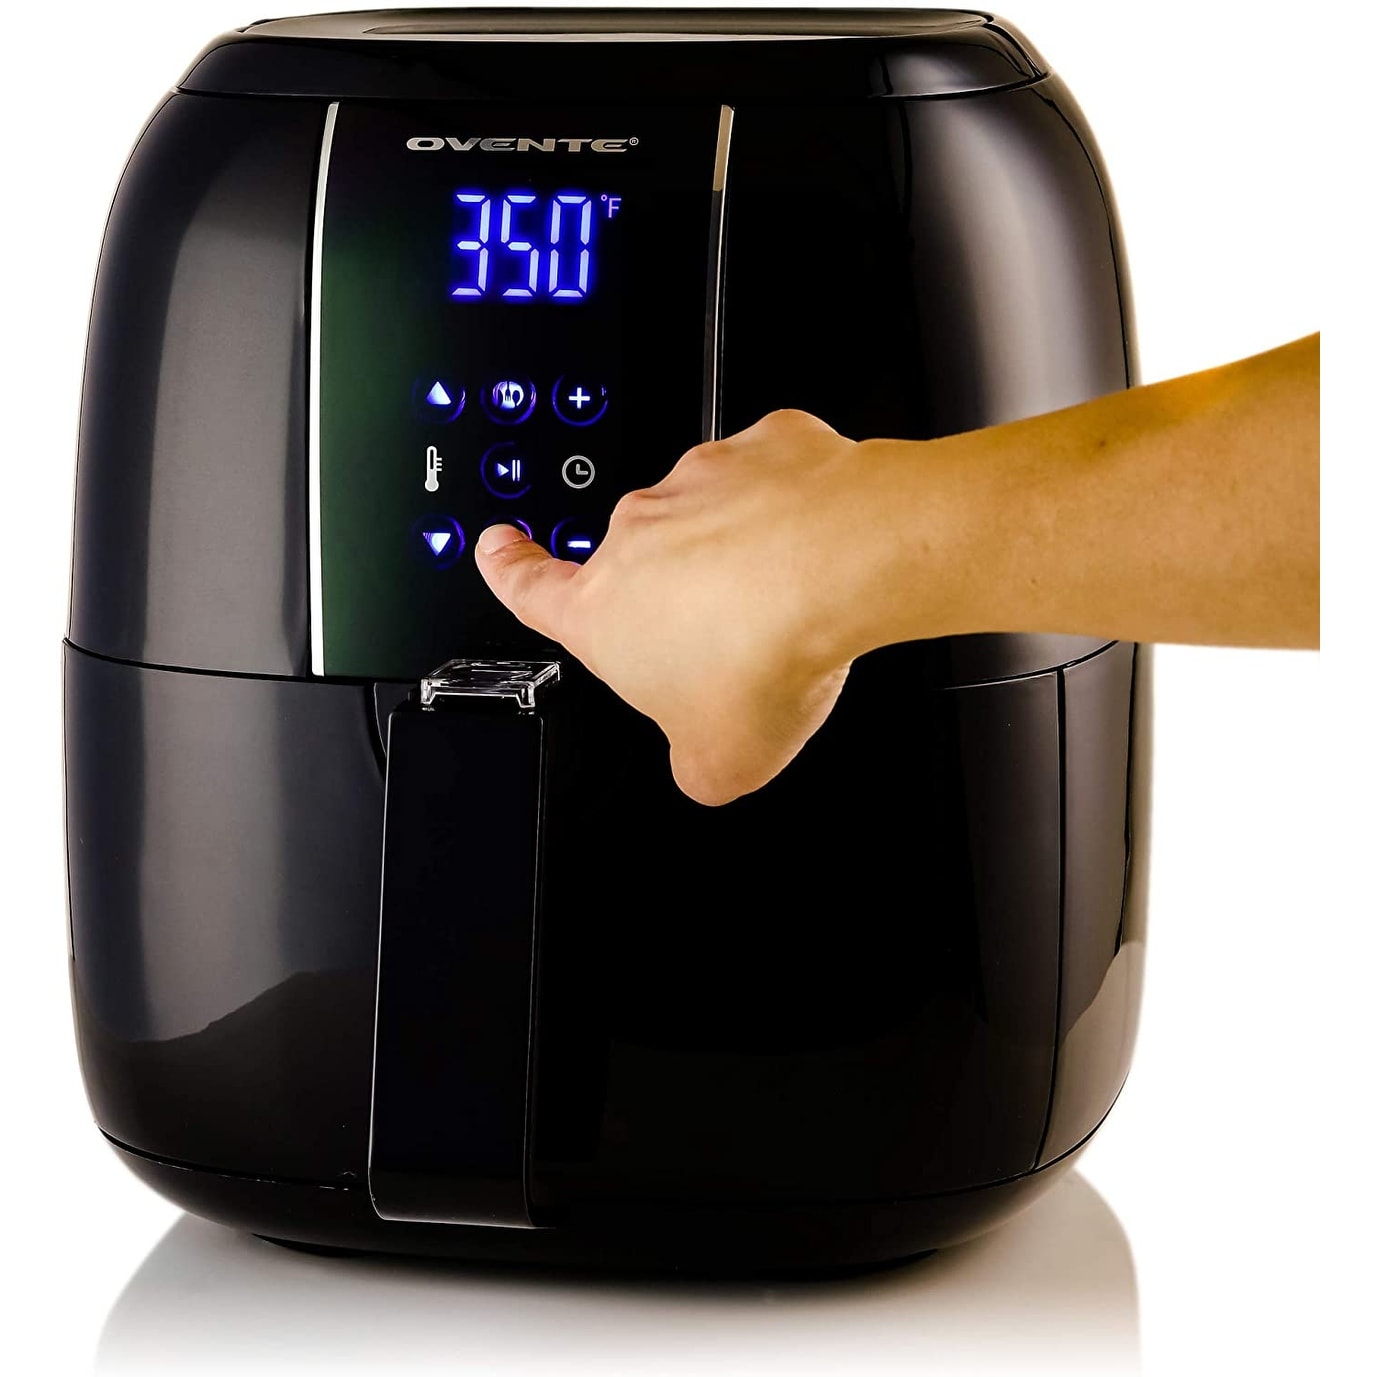 https://ak1.ostkcdn.com/images/products/is/images/direct/b8506ae576f862a20ce66169fa83b8c2a44ad24a/Ovente-Electric-Air-Fryer-3.2-Quart-for-Grilling-Roasting%2C-Non-Stick-Fry-Basket-%26-Pan%2C-FAD61302-Series.jpg